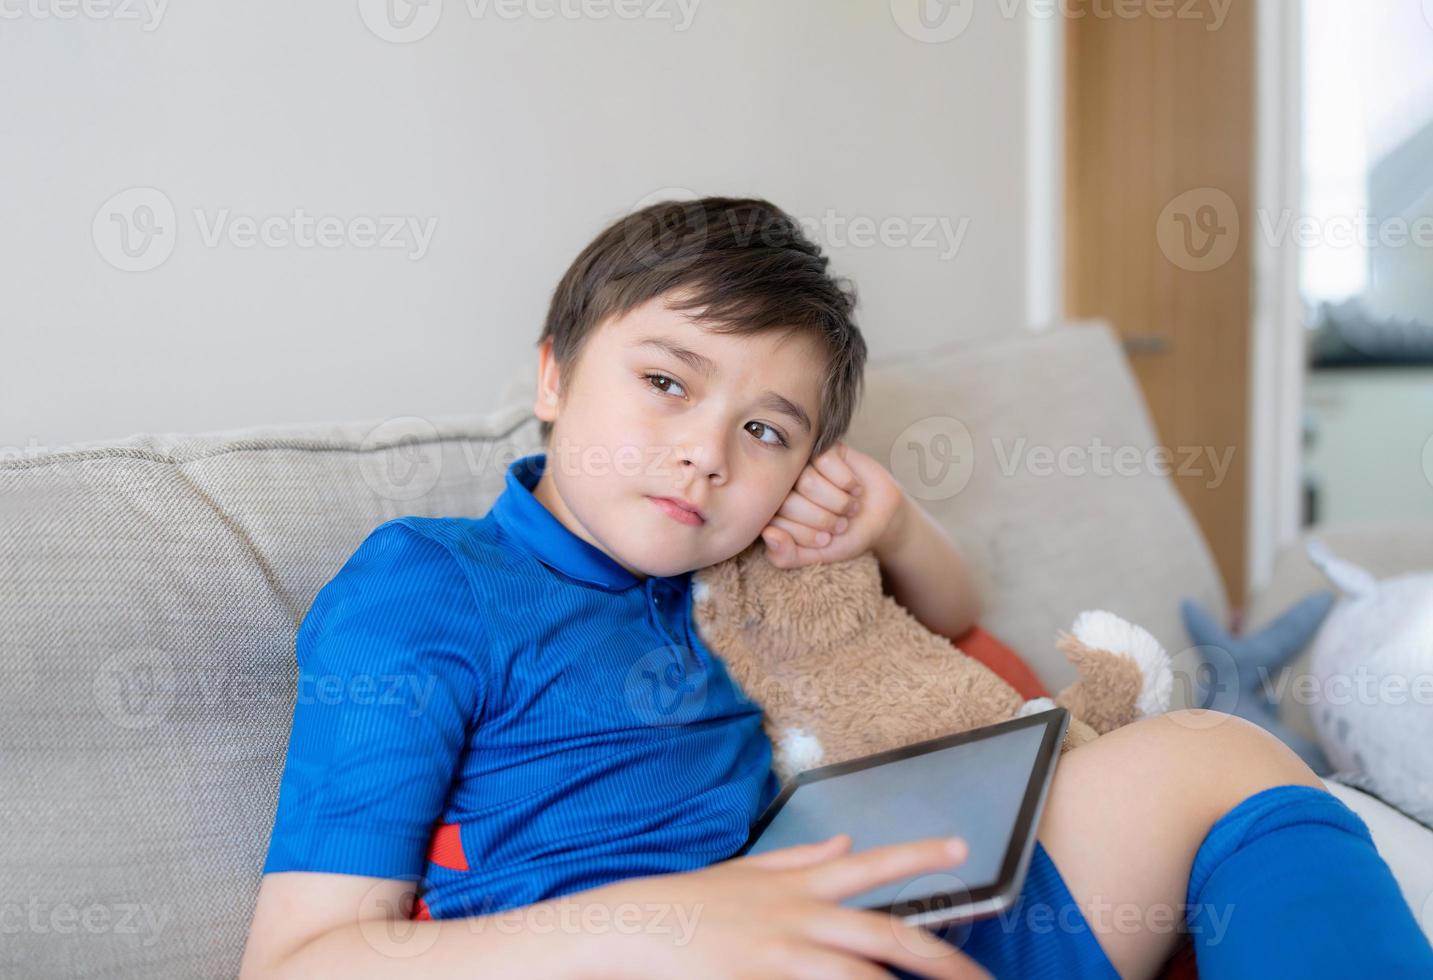 Young boy holding tablet mockup and looking deep in thought, Child playing game online on digital pad, School kid with sportswear sitting on sofa relaxing after play soccer or football with friends photo